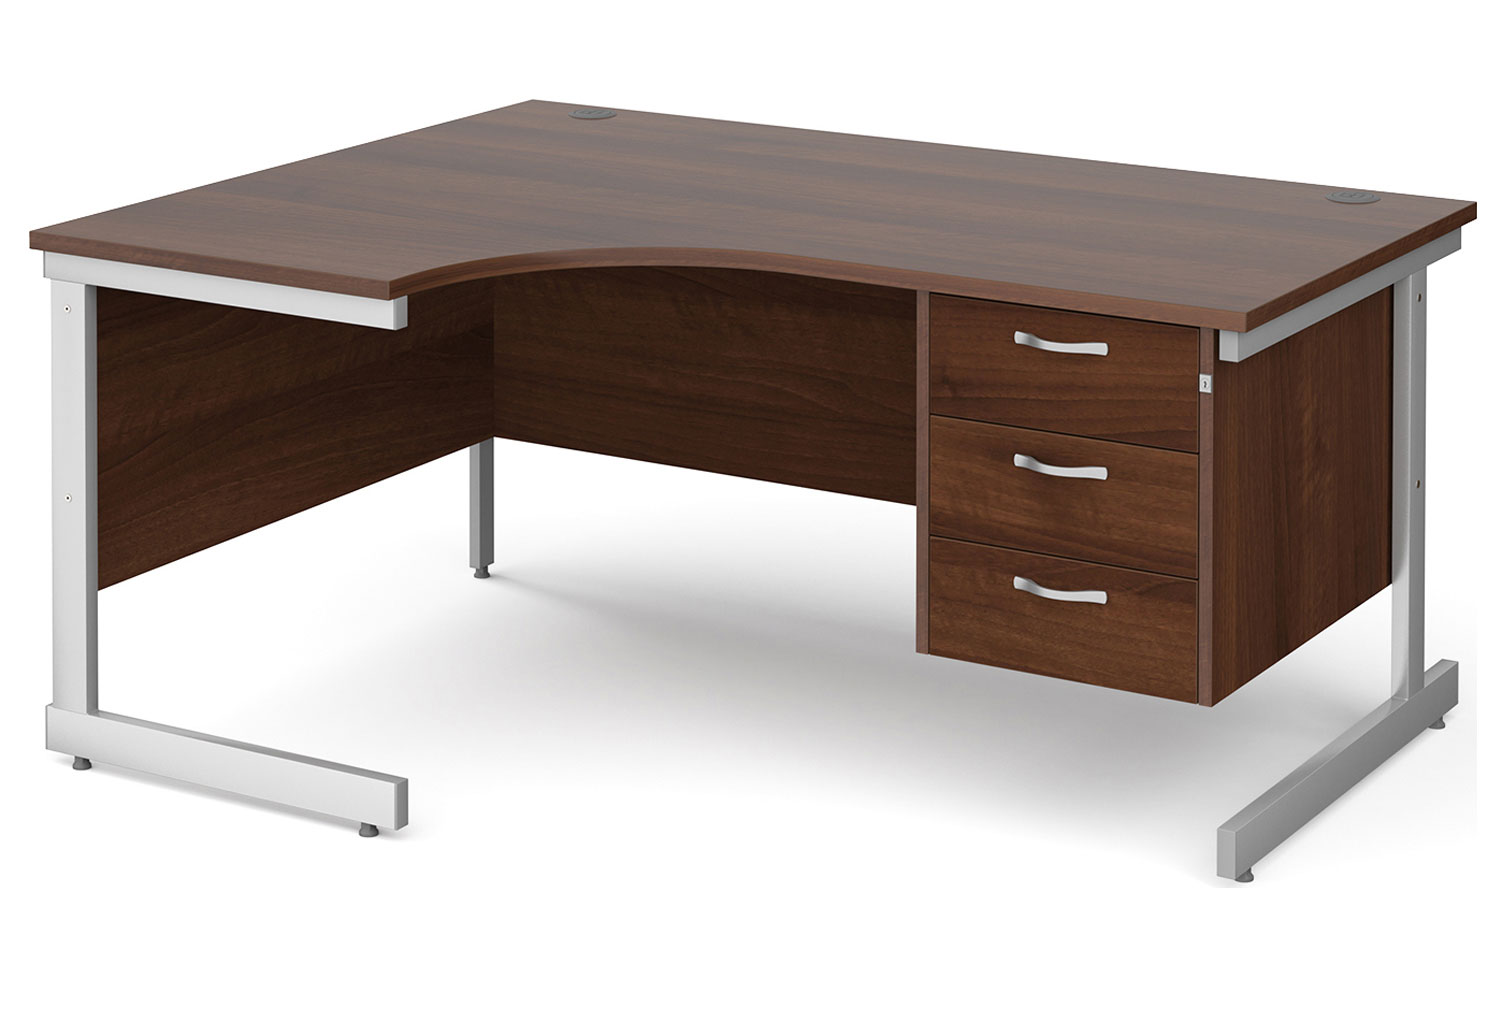 Thrifty Next-Day Left Hand Ergonomic Office Desk 3 Drawers Walnut, 160wx120/80dx73h (cm), Express Delivery